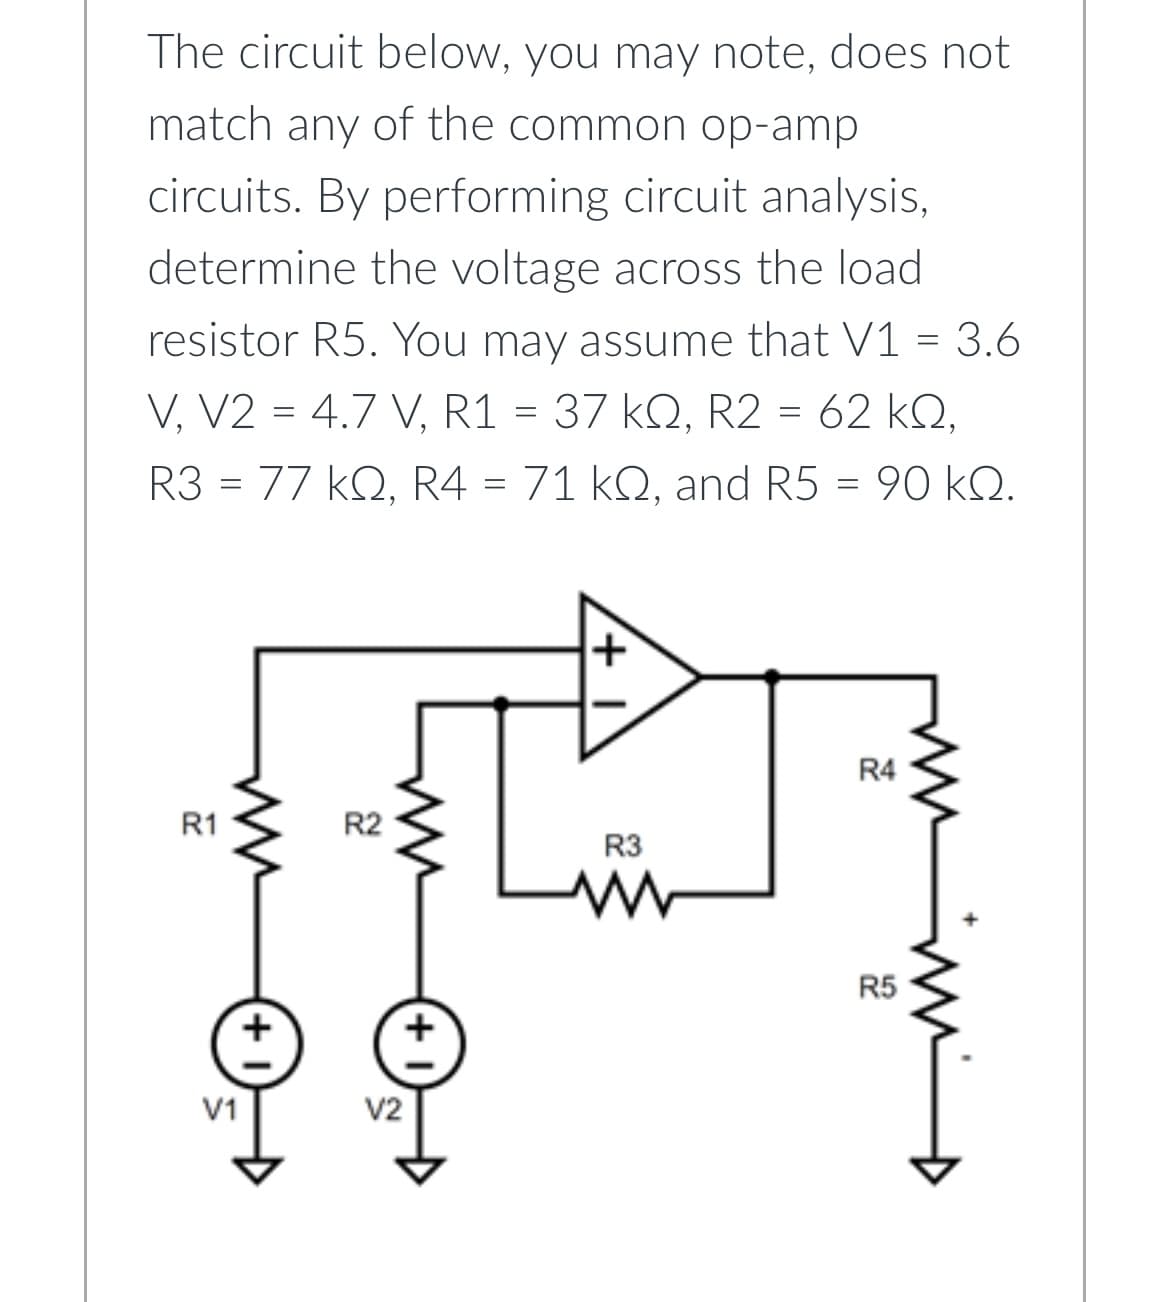 The circuit below, you may note, does not
match any of the common op-amp
circuits. By performing circuit analysis,
determine the voltage across the load
resistor R5. You may assume that V1 = 3.6
V, V2 = 4.7 V, R1 = 37 kQ, R2 = 62 KQ,
R3 = 77 kQ, R4 = 71 kQ, and R5 = 90 kQ.
R1
ww
V1
+
R2
V2
R3
R4
R5
mm D